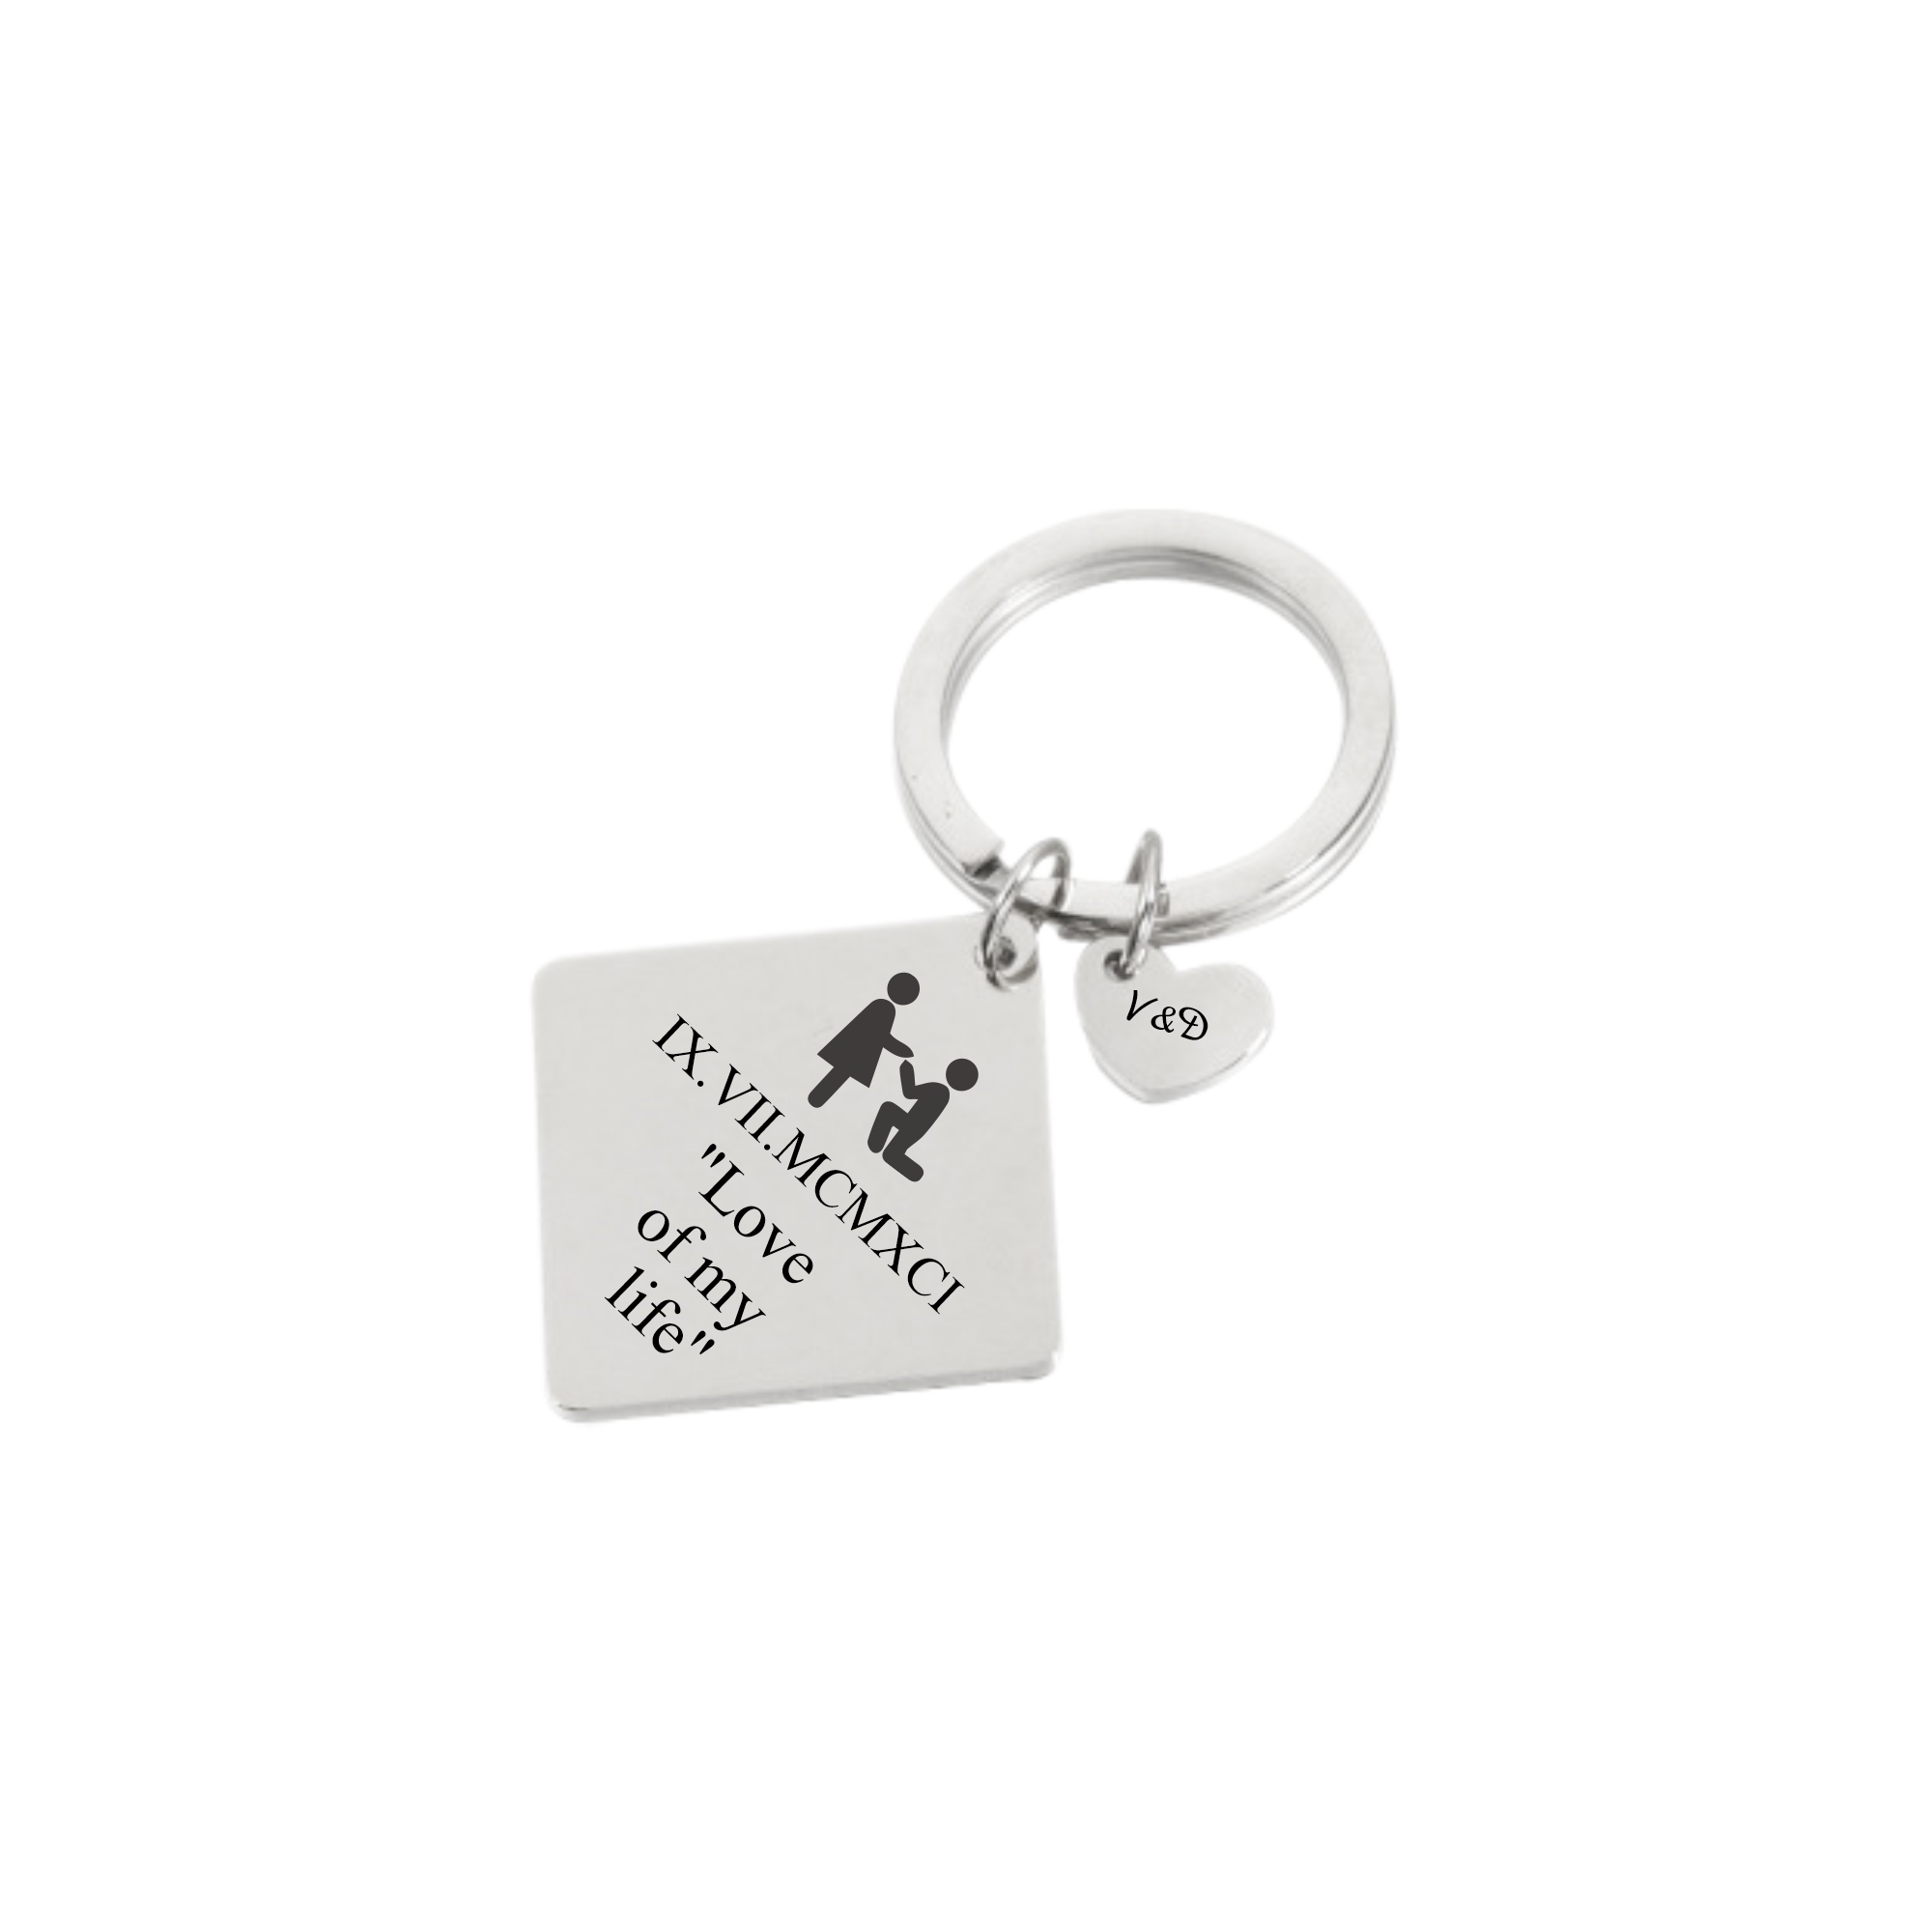 Custom Engraved Square with Heart Charm Keychain KCK 18